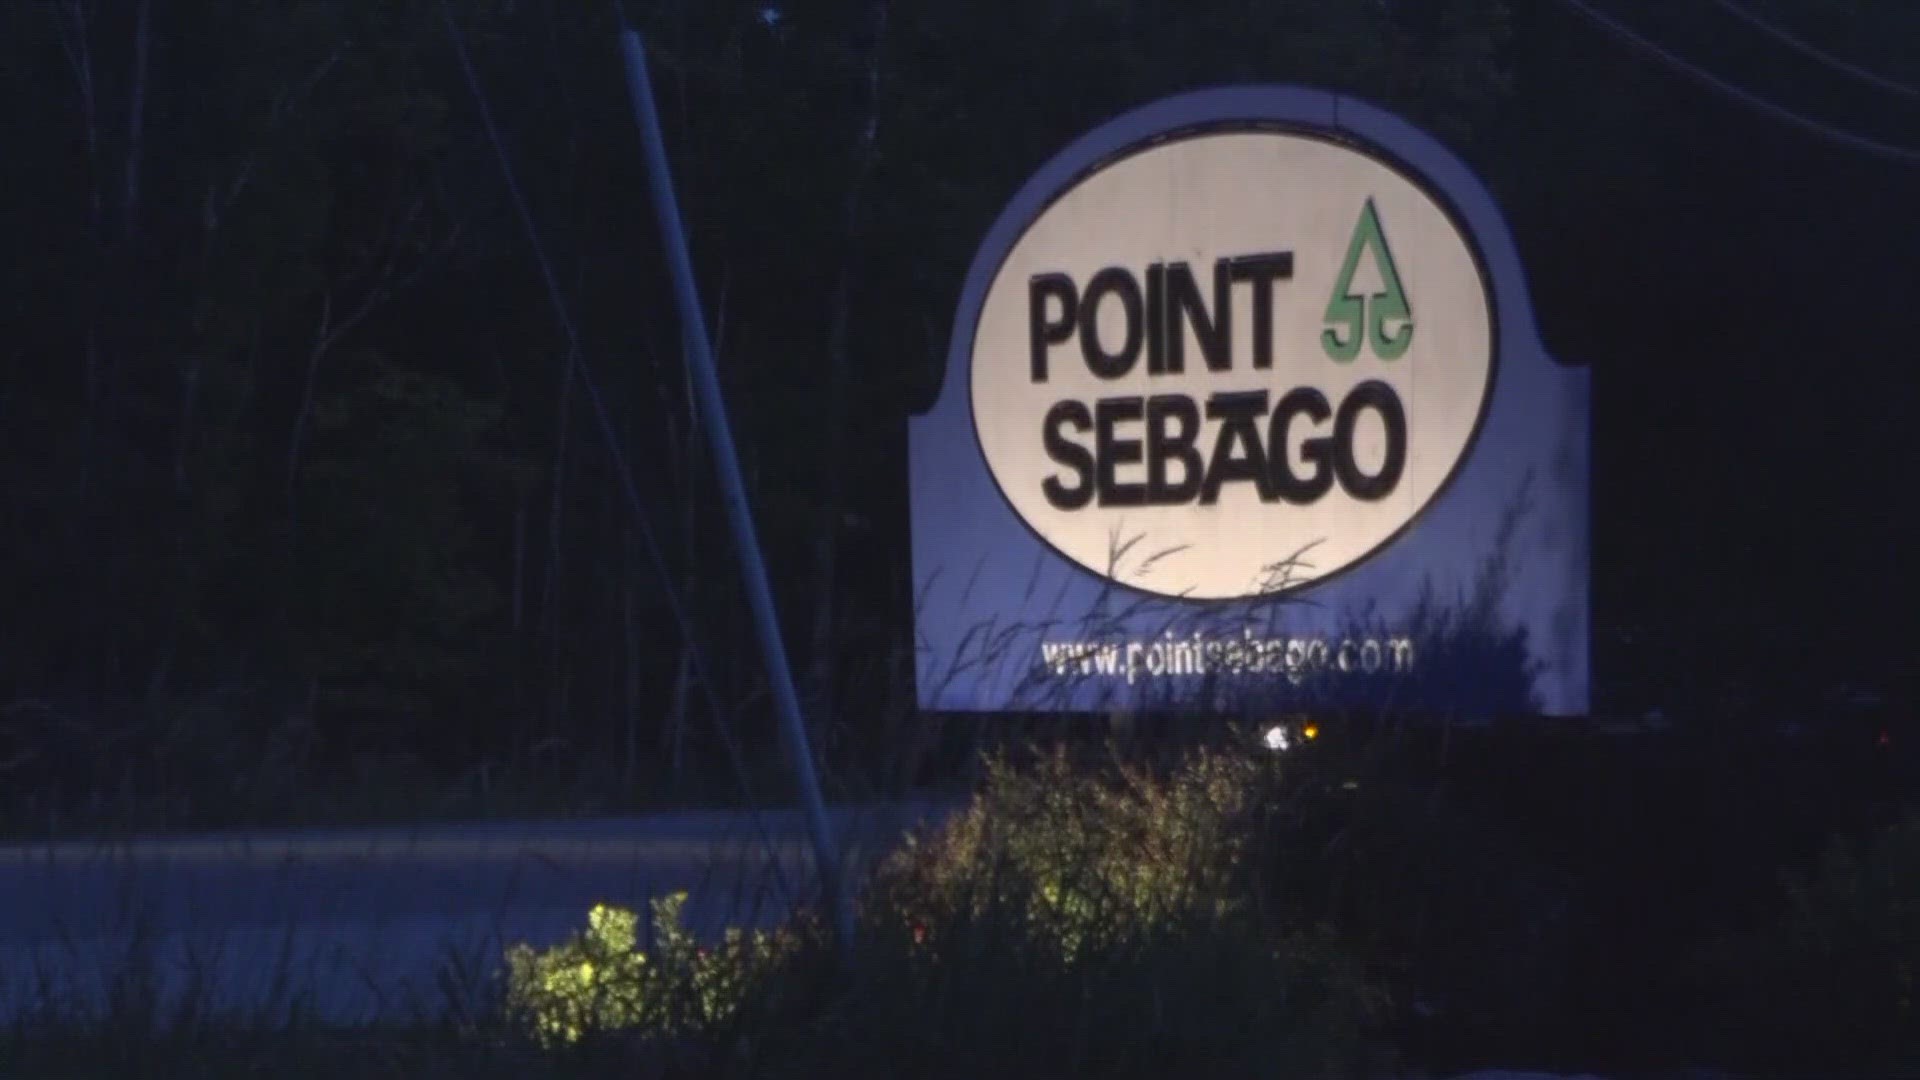 An official with the Cumberland County Sheriff's Office said no one suffered injuries during the incident near the Point Sebago Resort Sunday night.